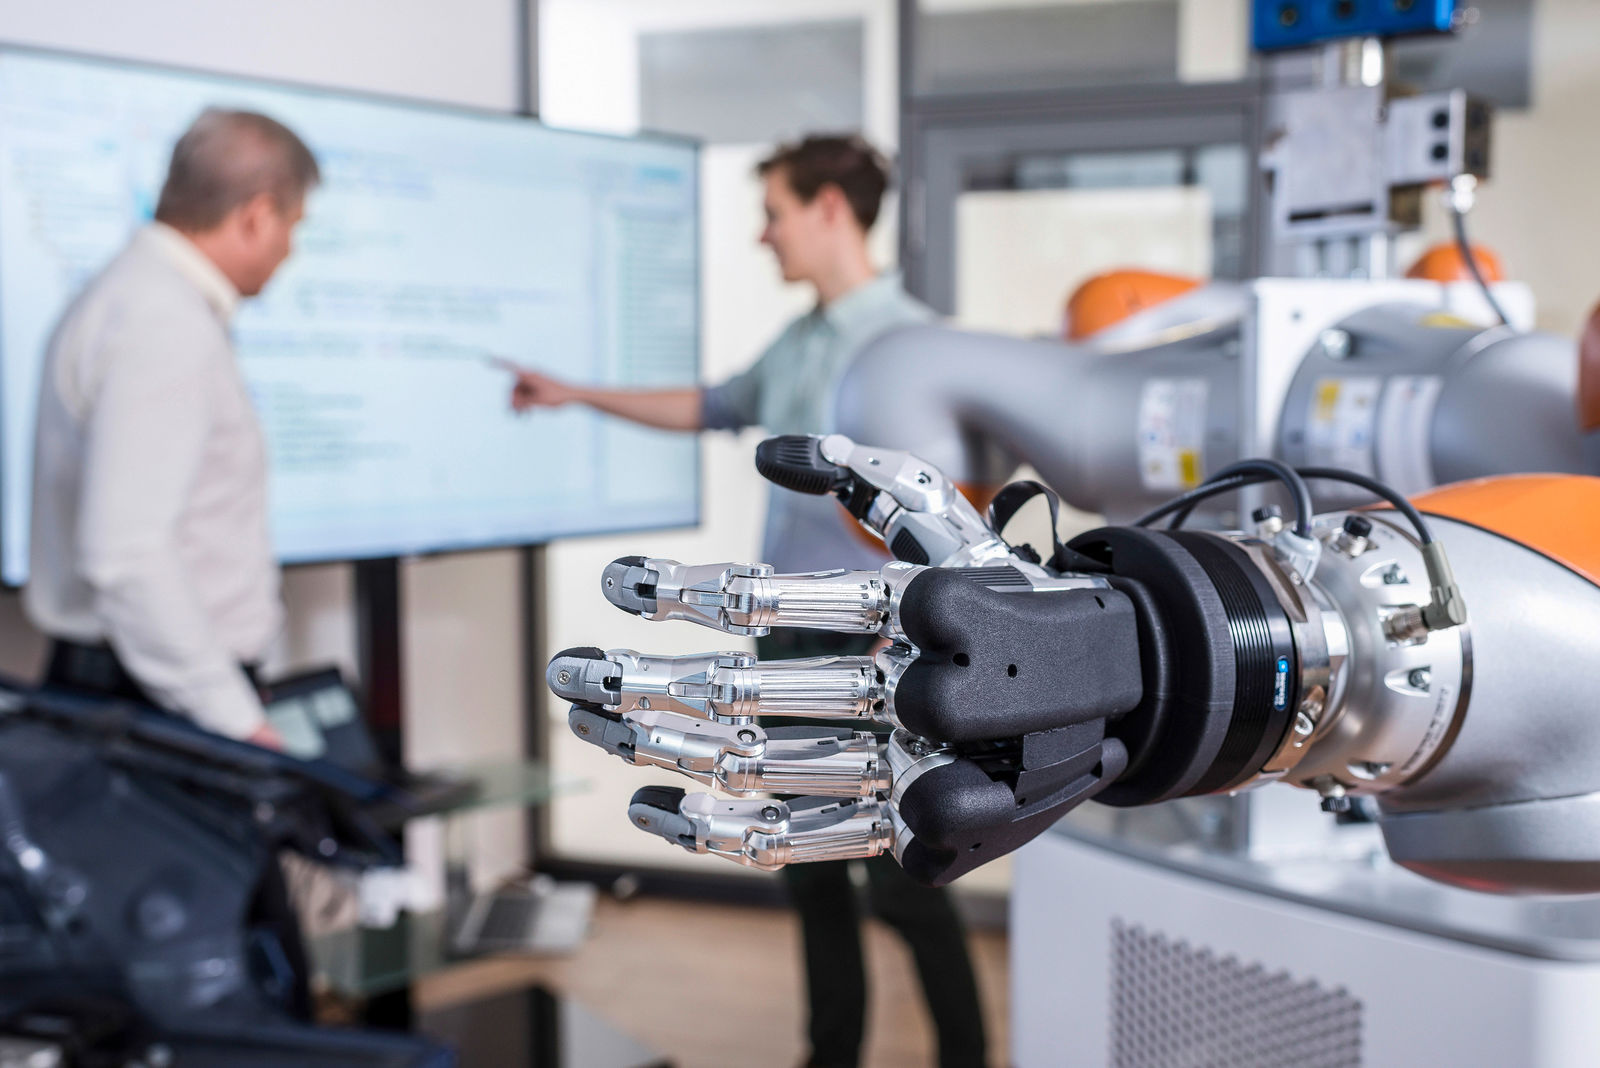 What does a … robotics expert actually do at Volkswagen?